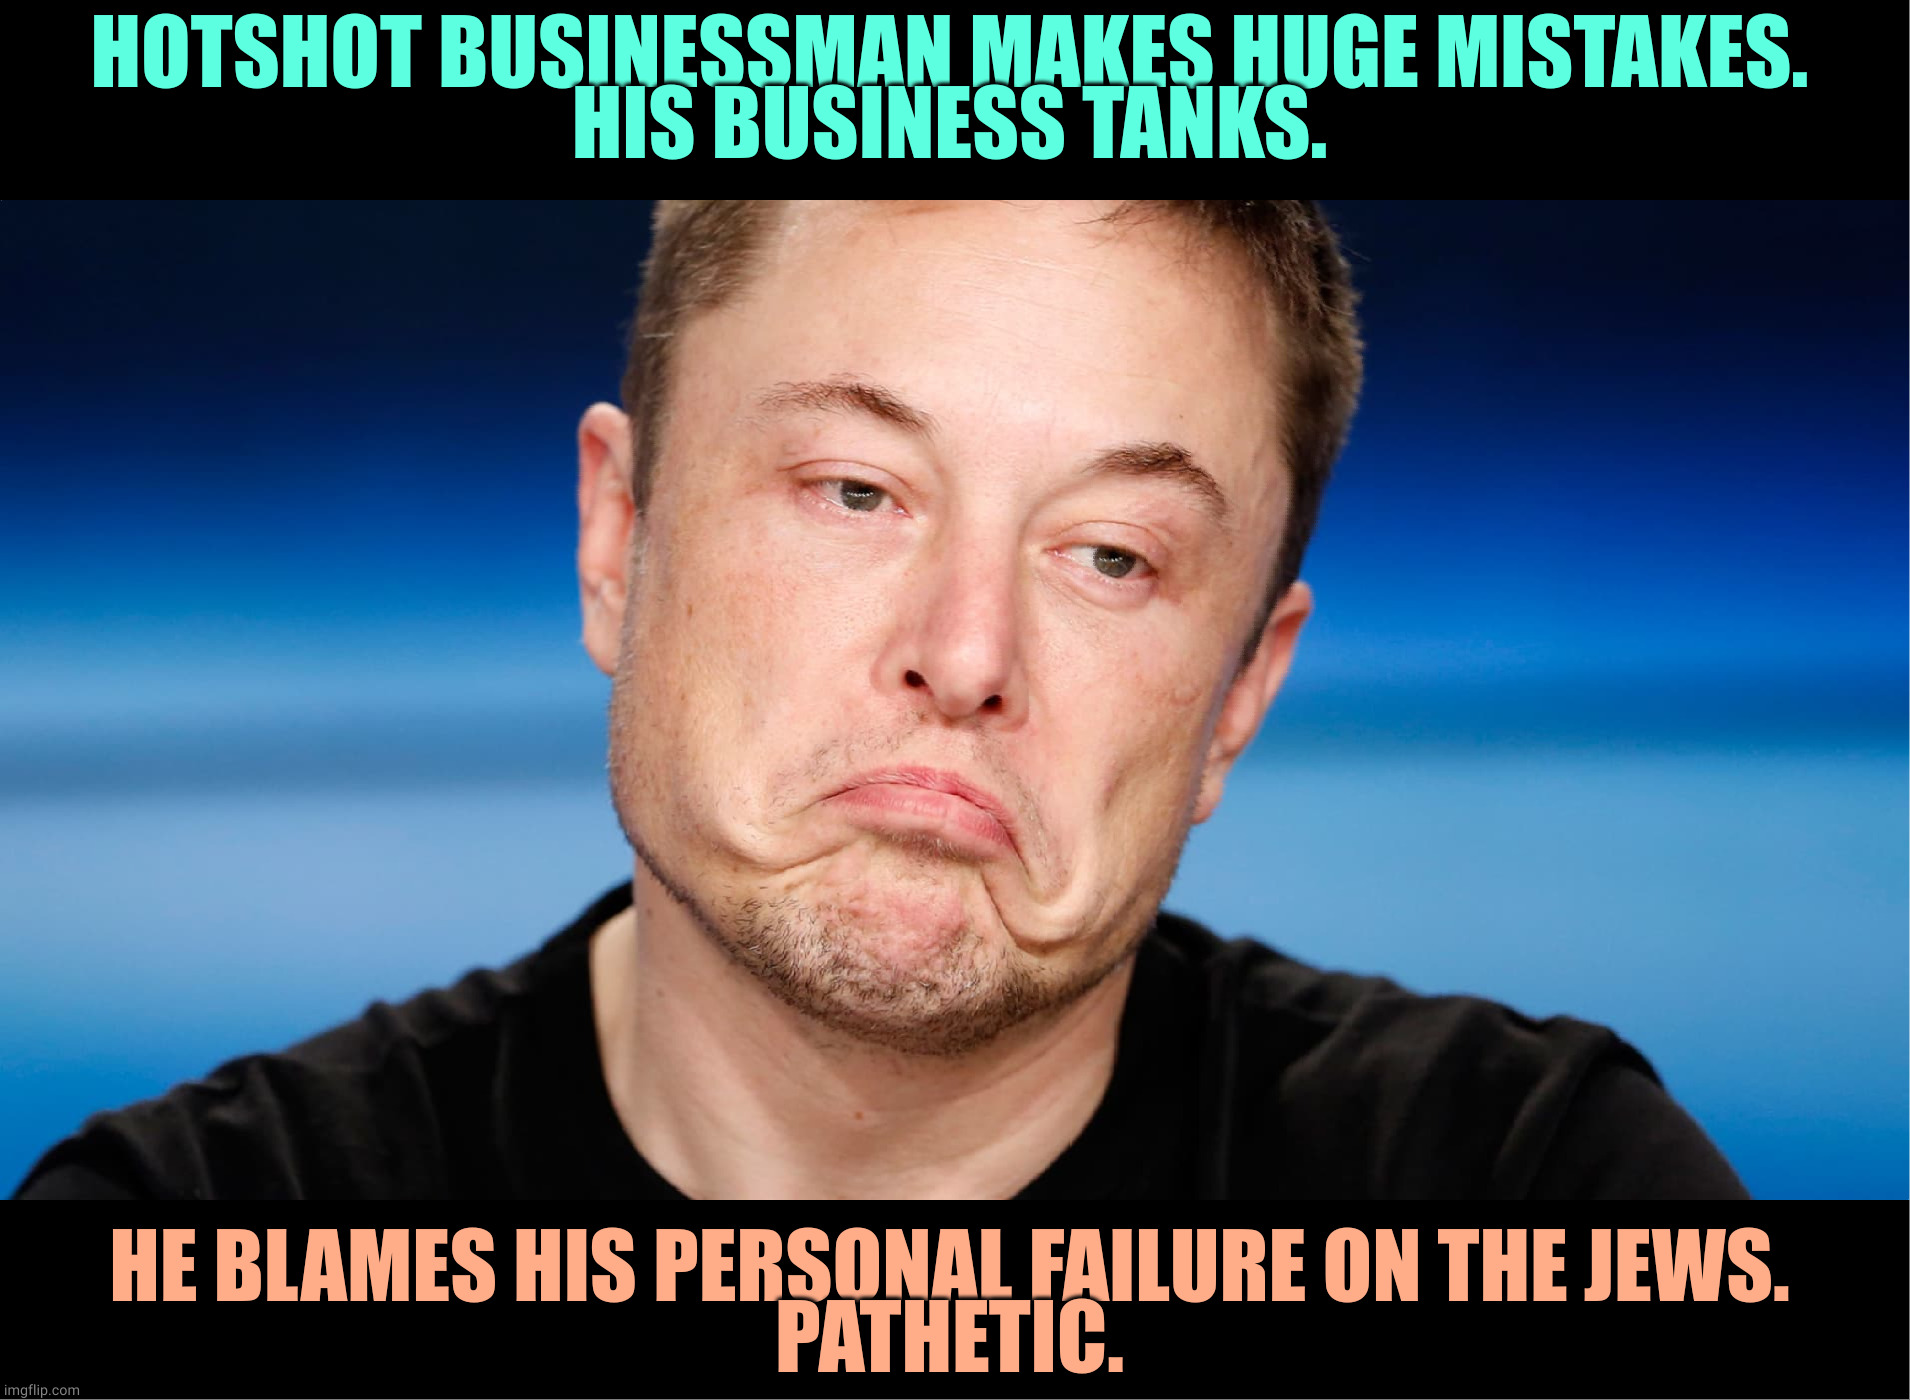 Weak. | HOTSHOT BUSINESSMAN MAKES HUGE MISTAKES.
HIS BUSINESS TANKS. HE BLAMES HIS PERSONAL FAILURE ON THE JEWS.
PATHETIC. | image tagged in elon musk chinese puppet who wants twitter,elon musk,fail,failure,anti-semite and a racist,twitter | made w/ Imgflip meme maker